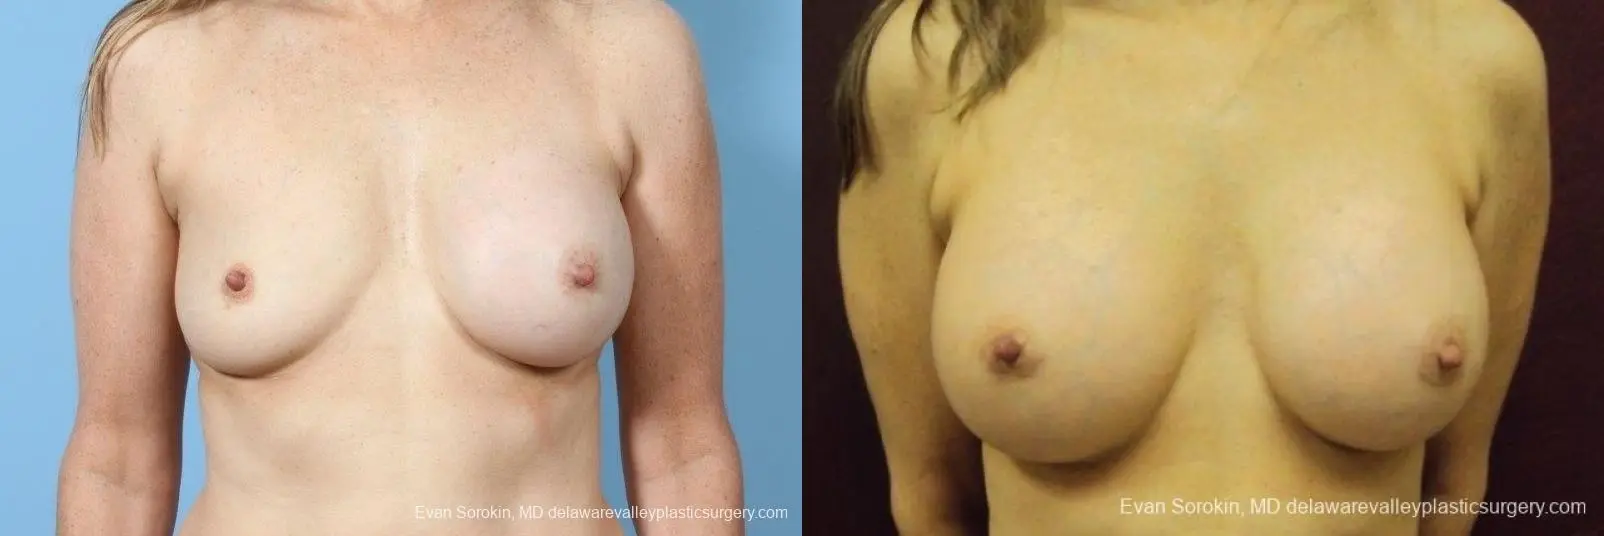 Philadelphia Breast Augmentation 8708 - Before and After